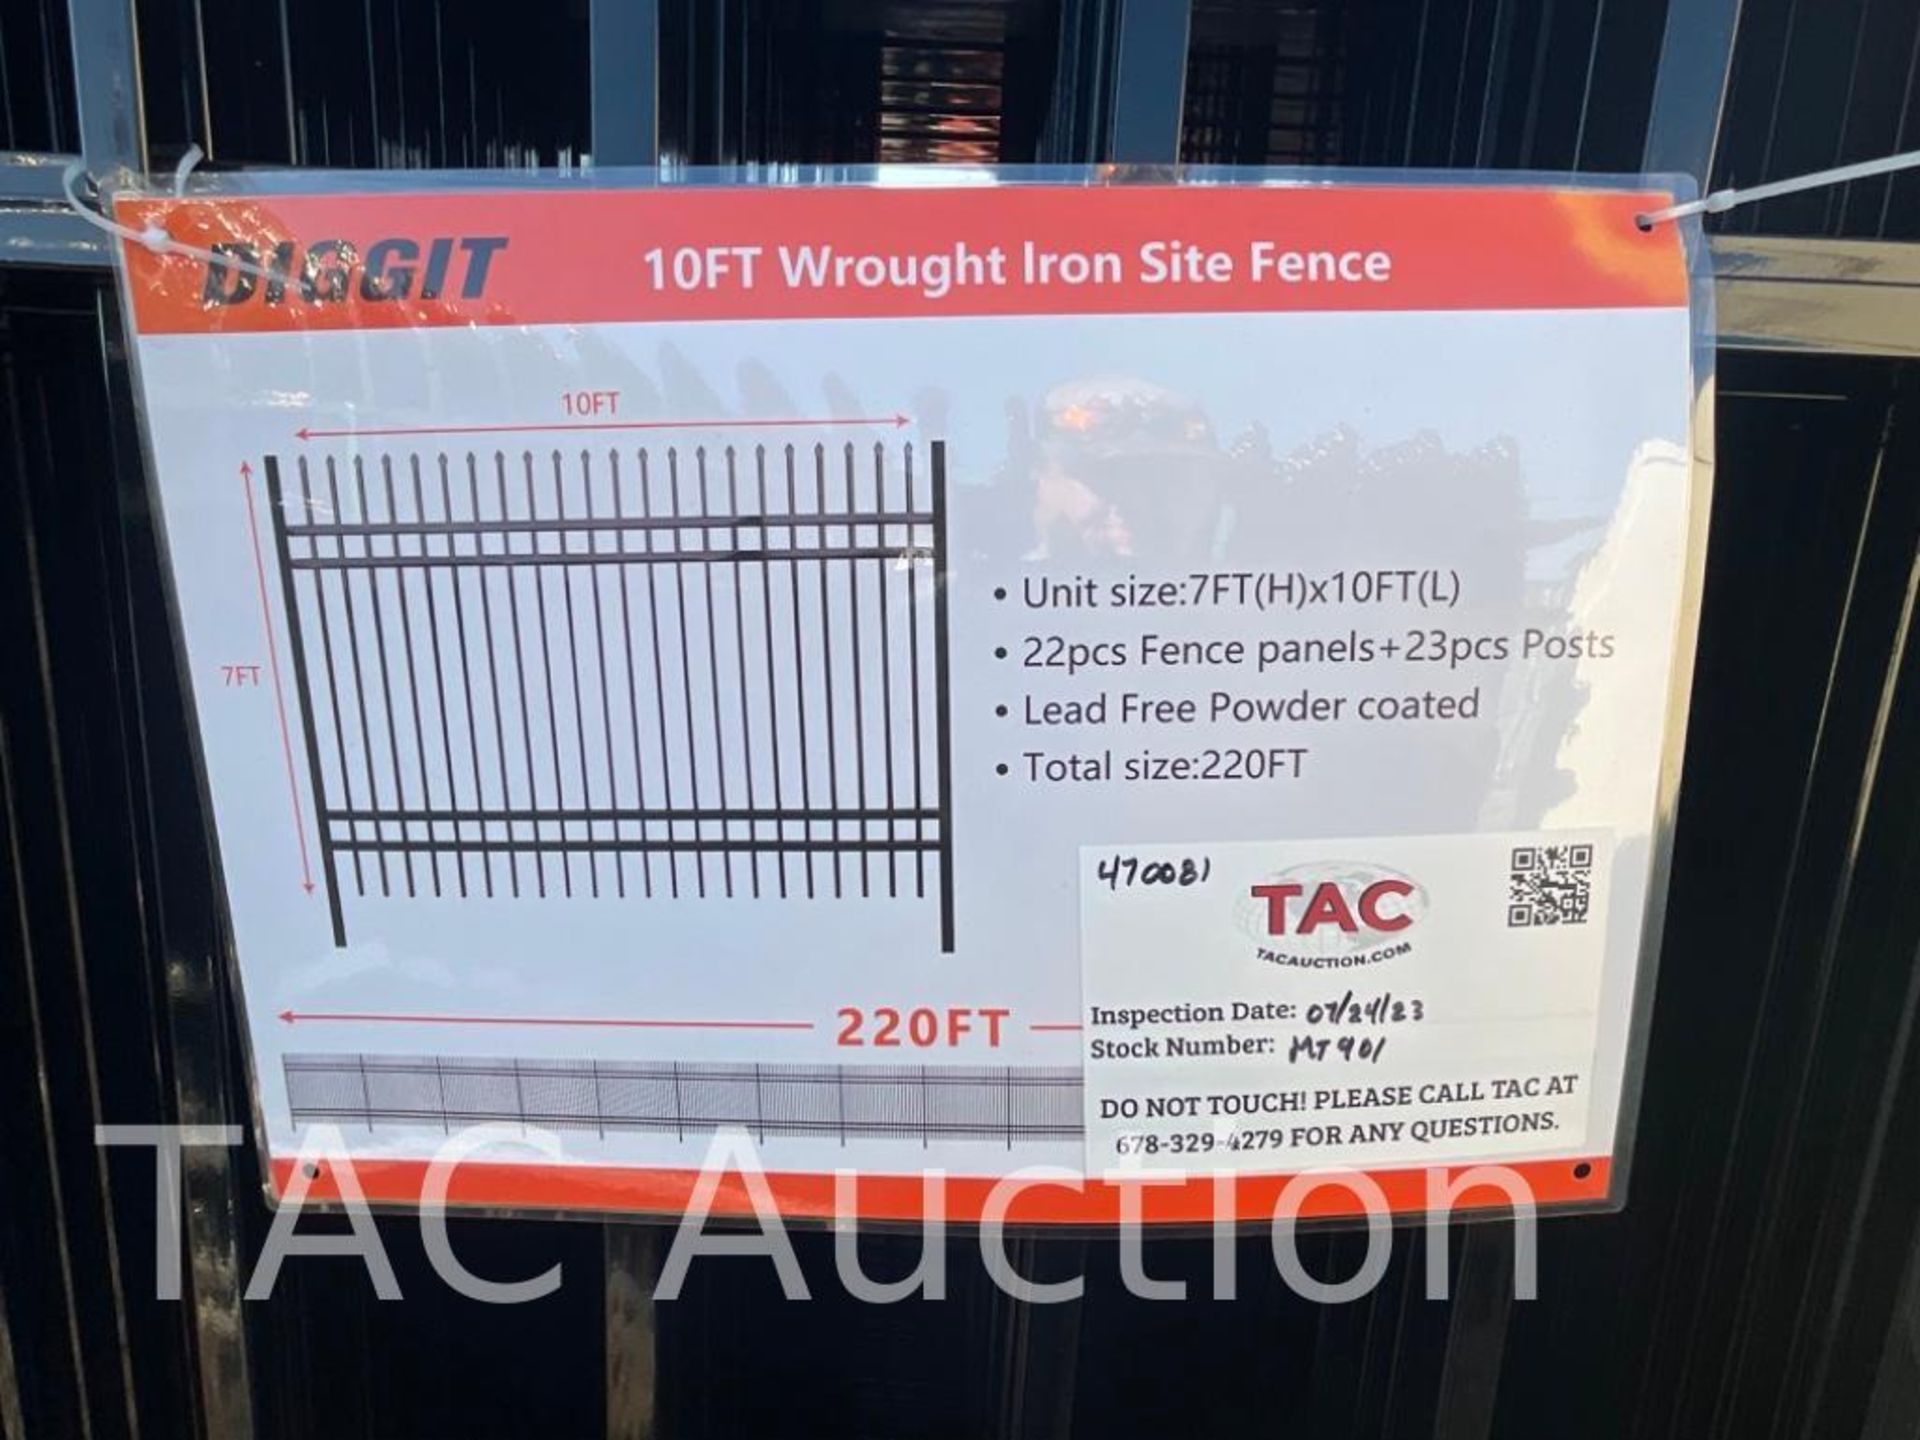 New Powder Coated Wrought Iron Fencing - Image 3 of 5